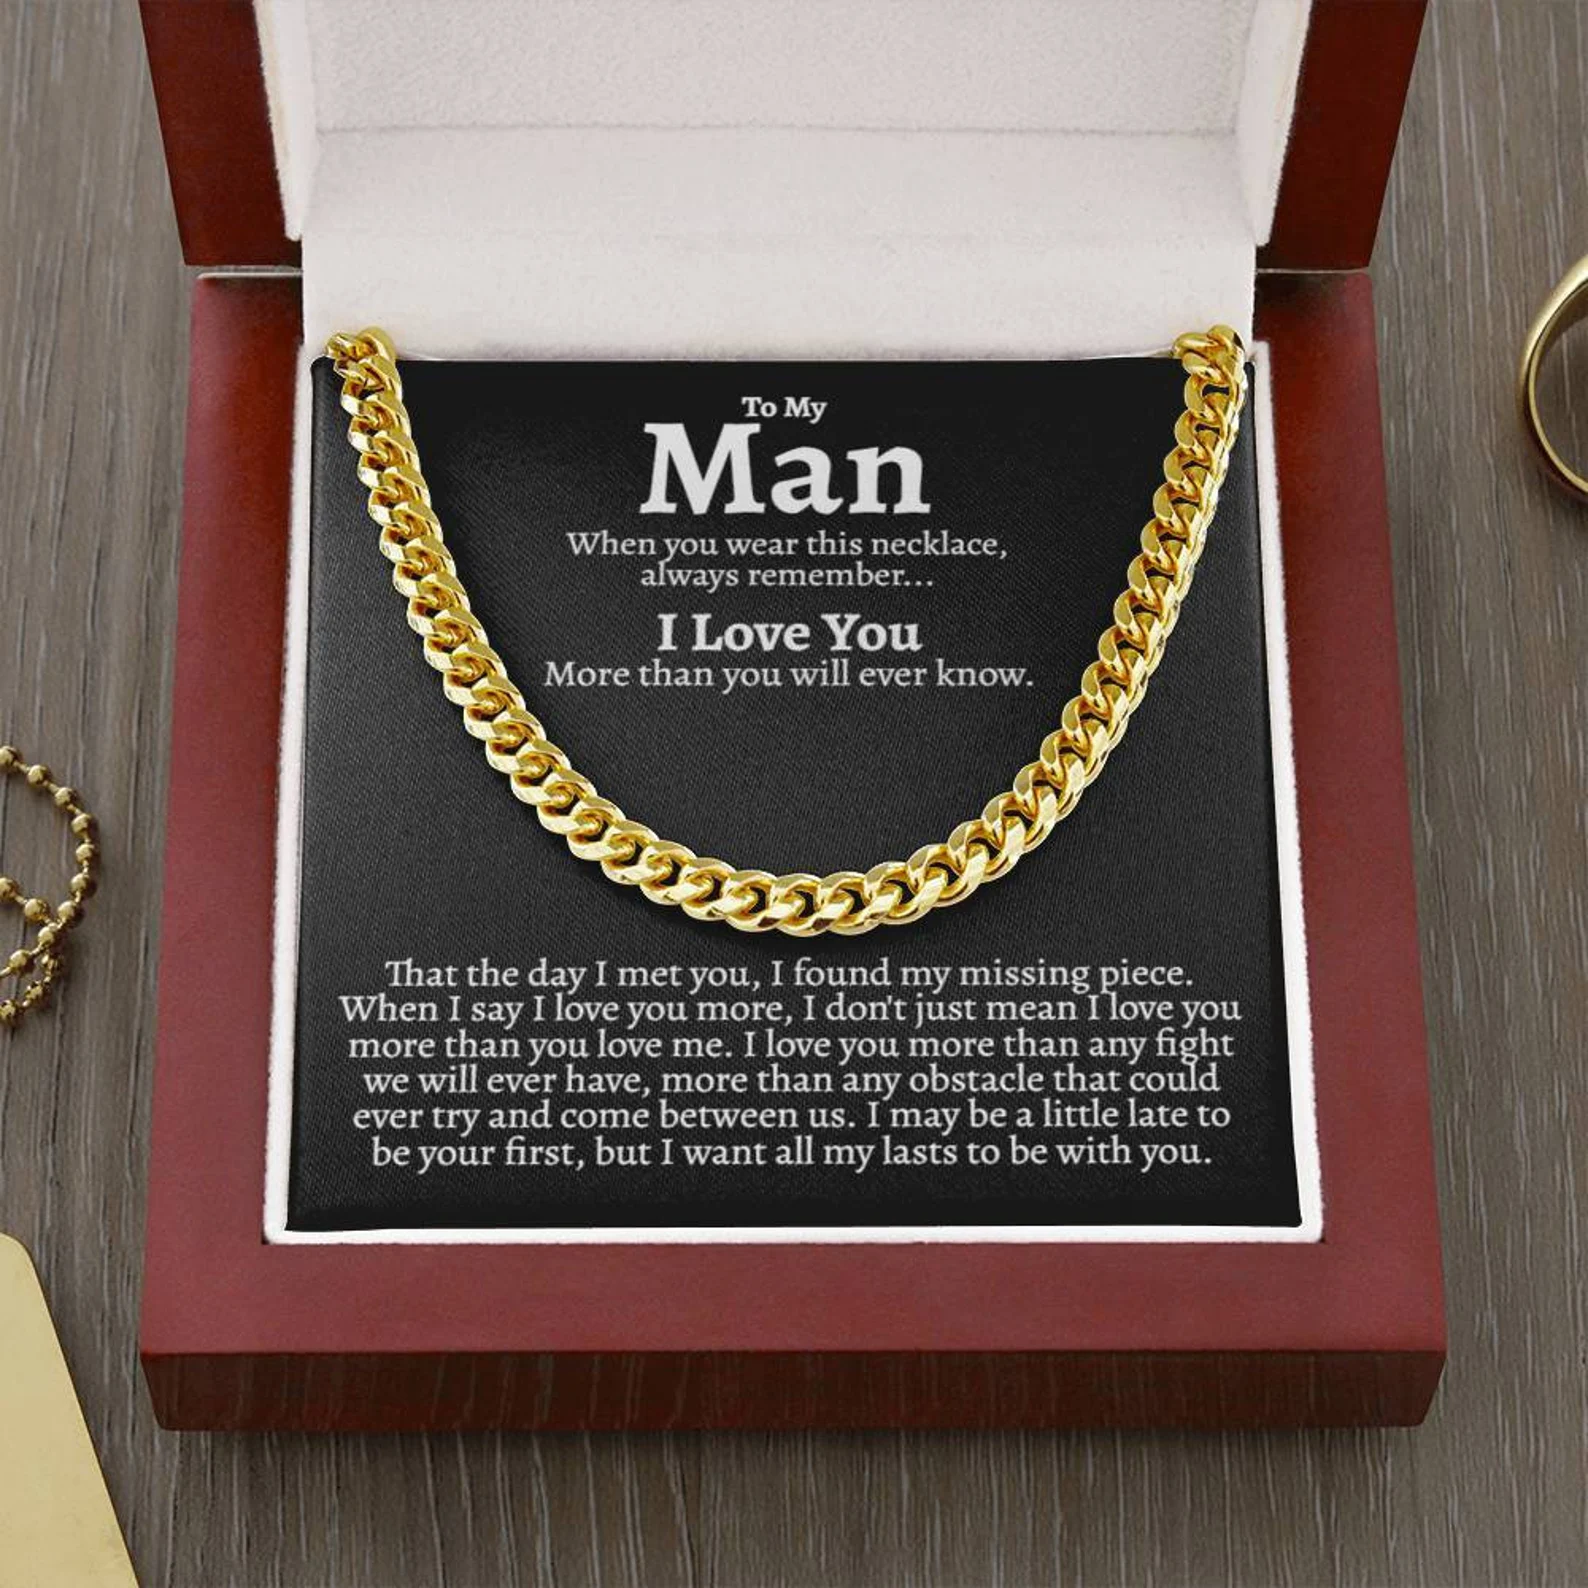 To My Man Cuban Chain Necklace for Him, Romantic Birthday Gifts for Him Christmas, Best Jewelry for Men, Jewelry for Him Romantic, To My Man